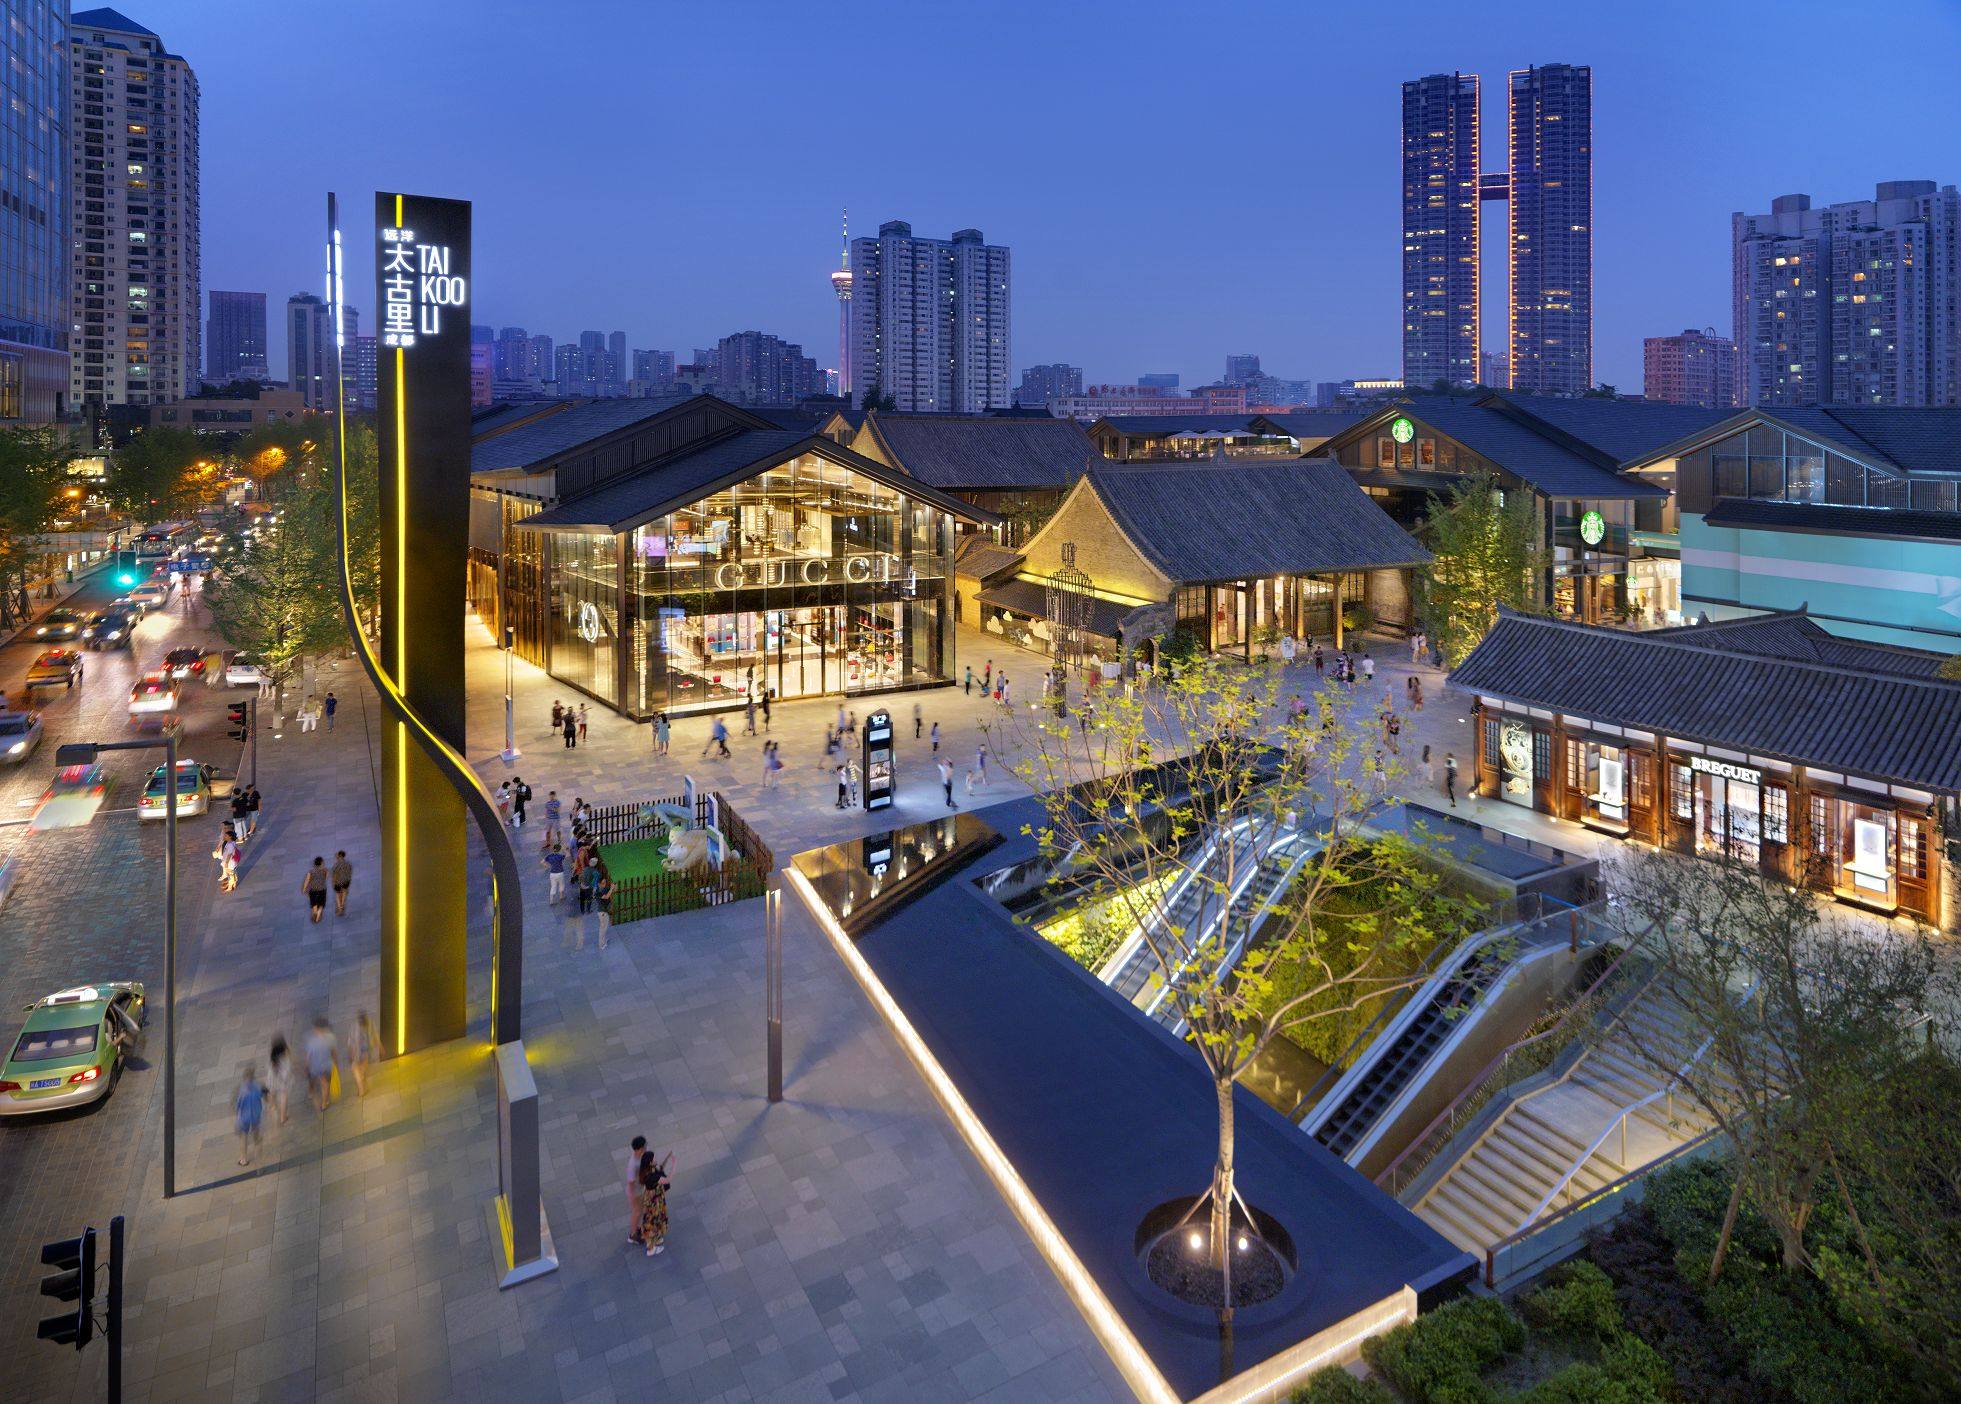 Sino-Ocean and Swire Pacific jointly developed the Taikoo Li shopping mall in Chengdu, China. Photo: SCMP